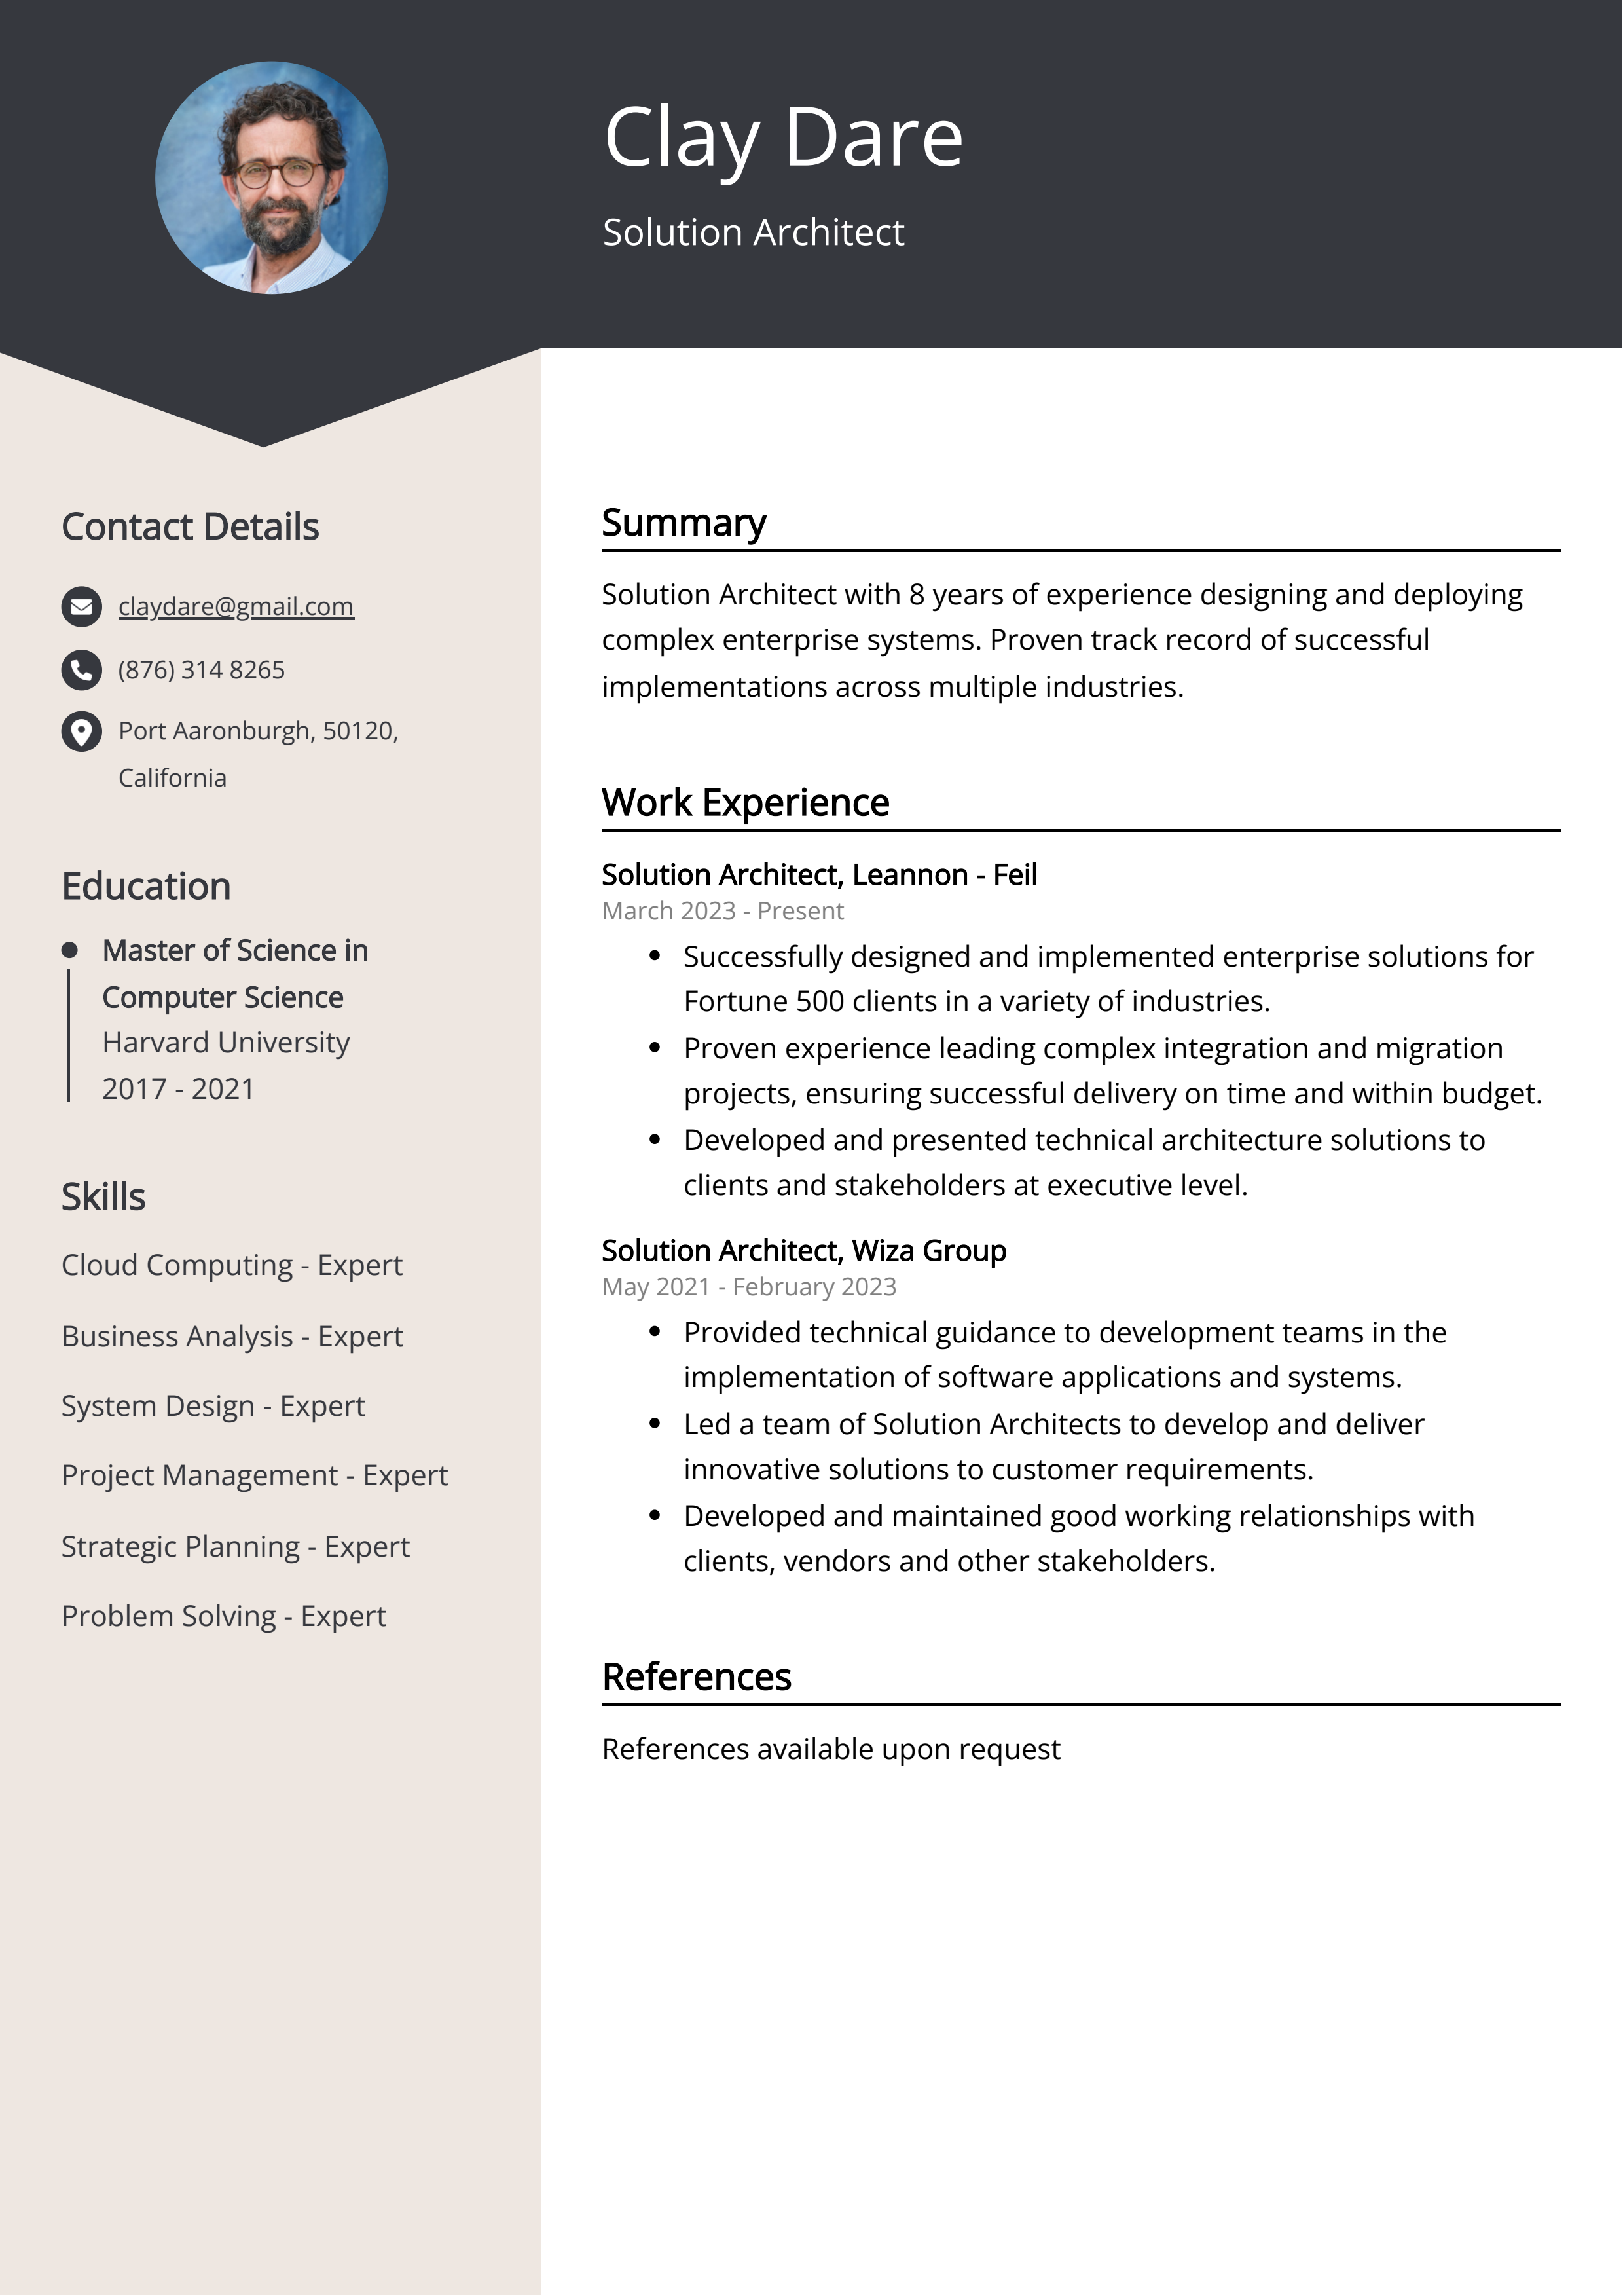 Solution Architect CV Example